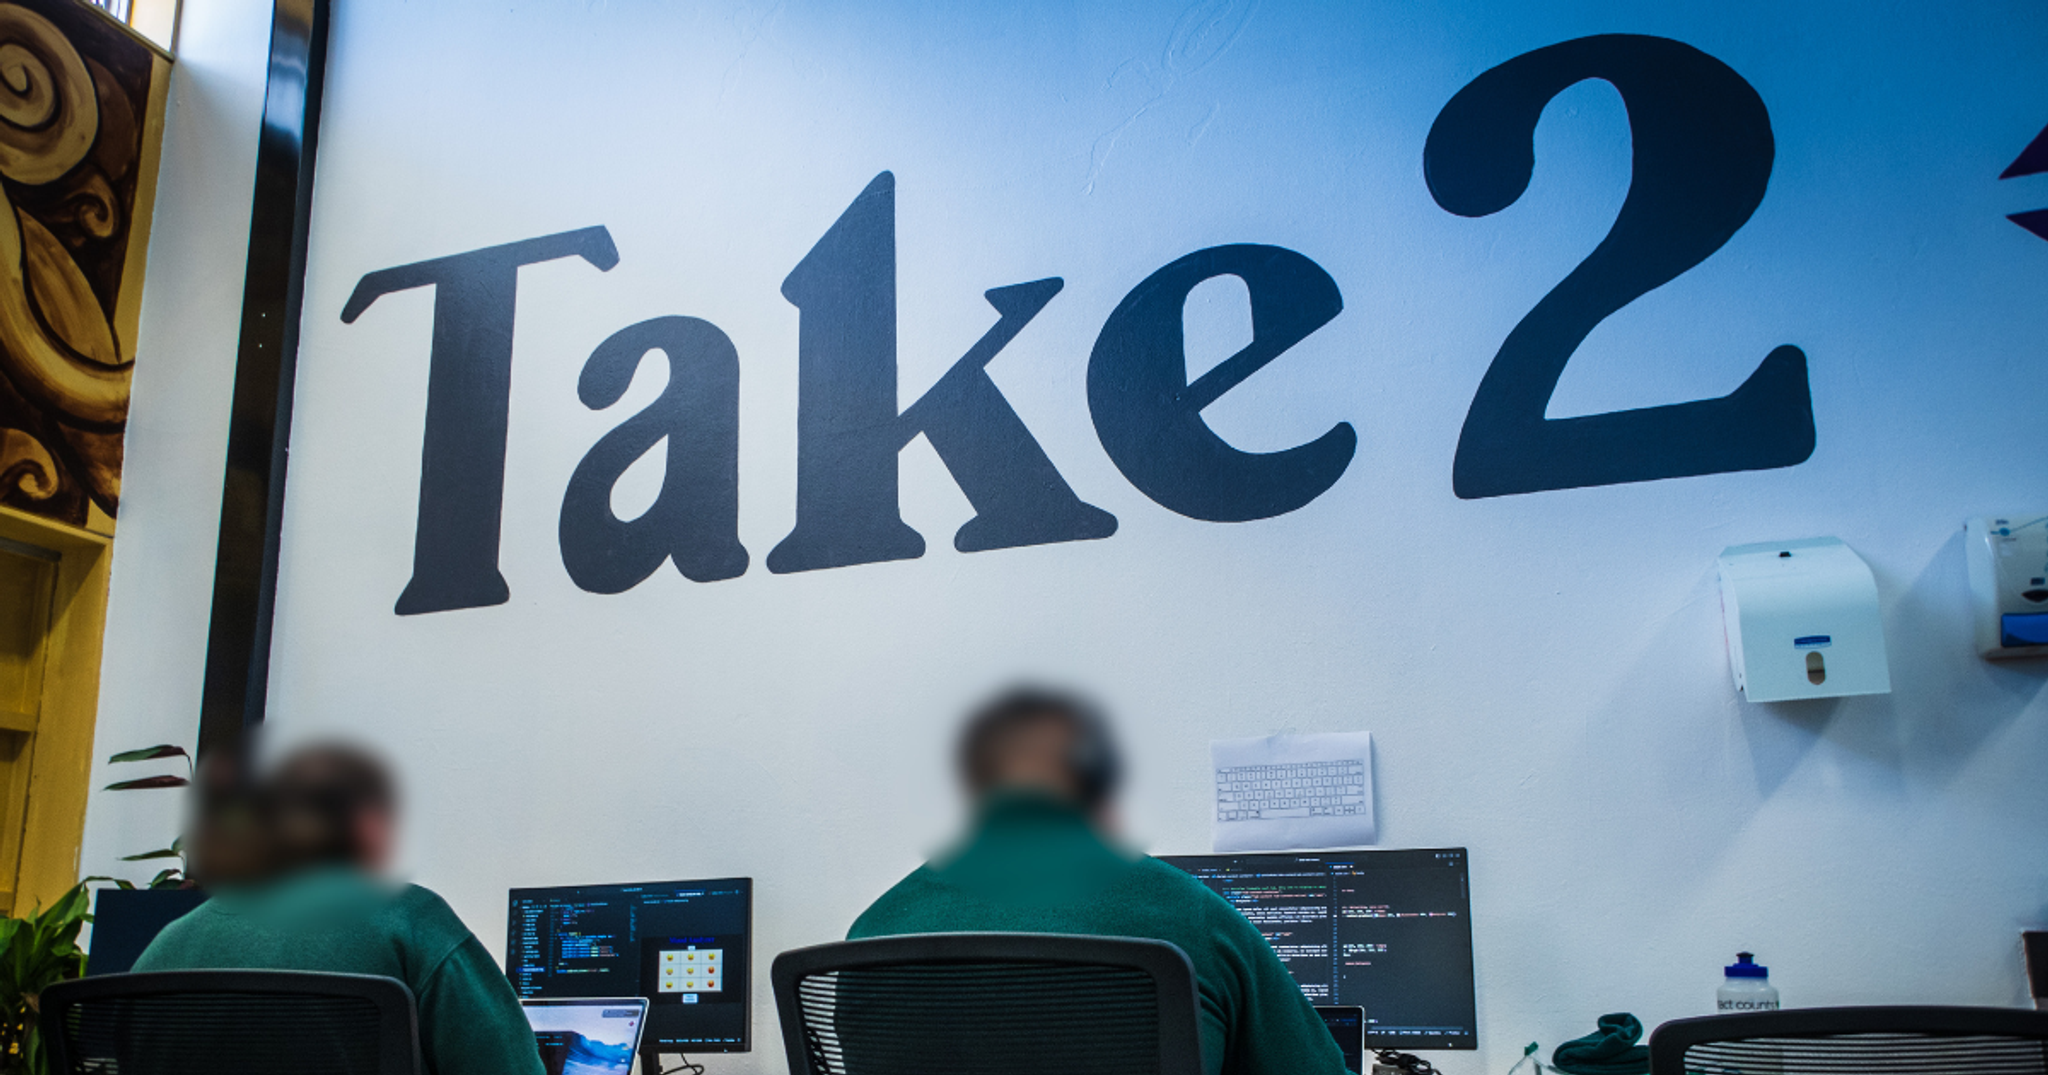 The Take2 logo on a wall with two inmates coding in the foreground